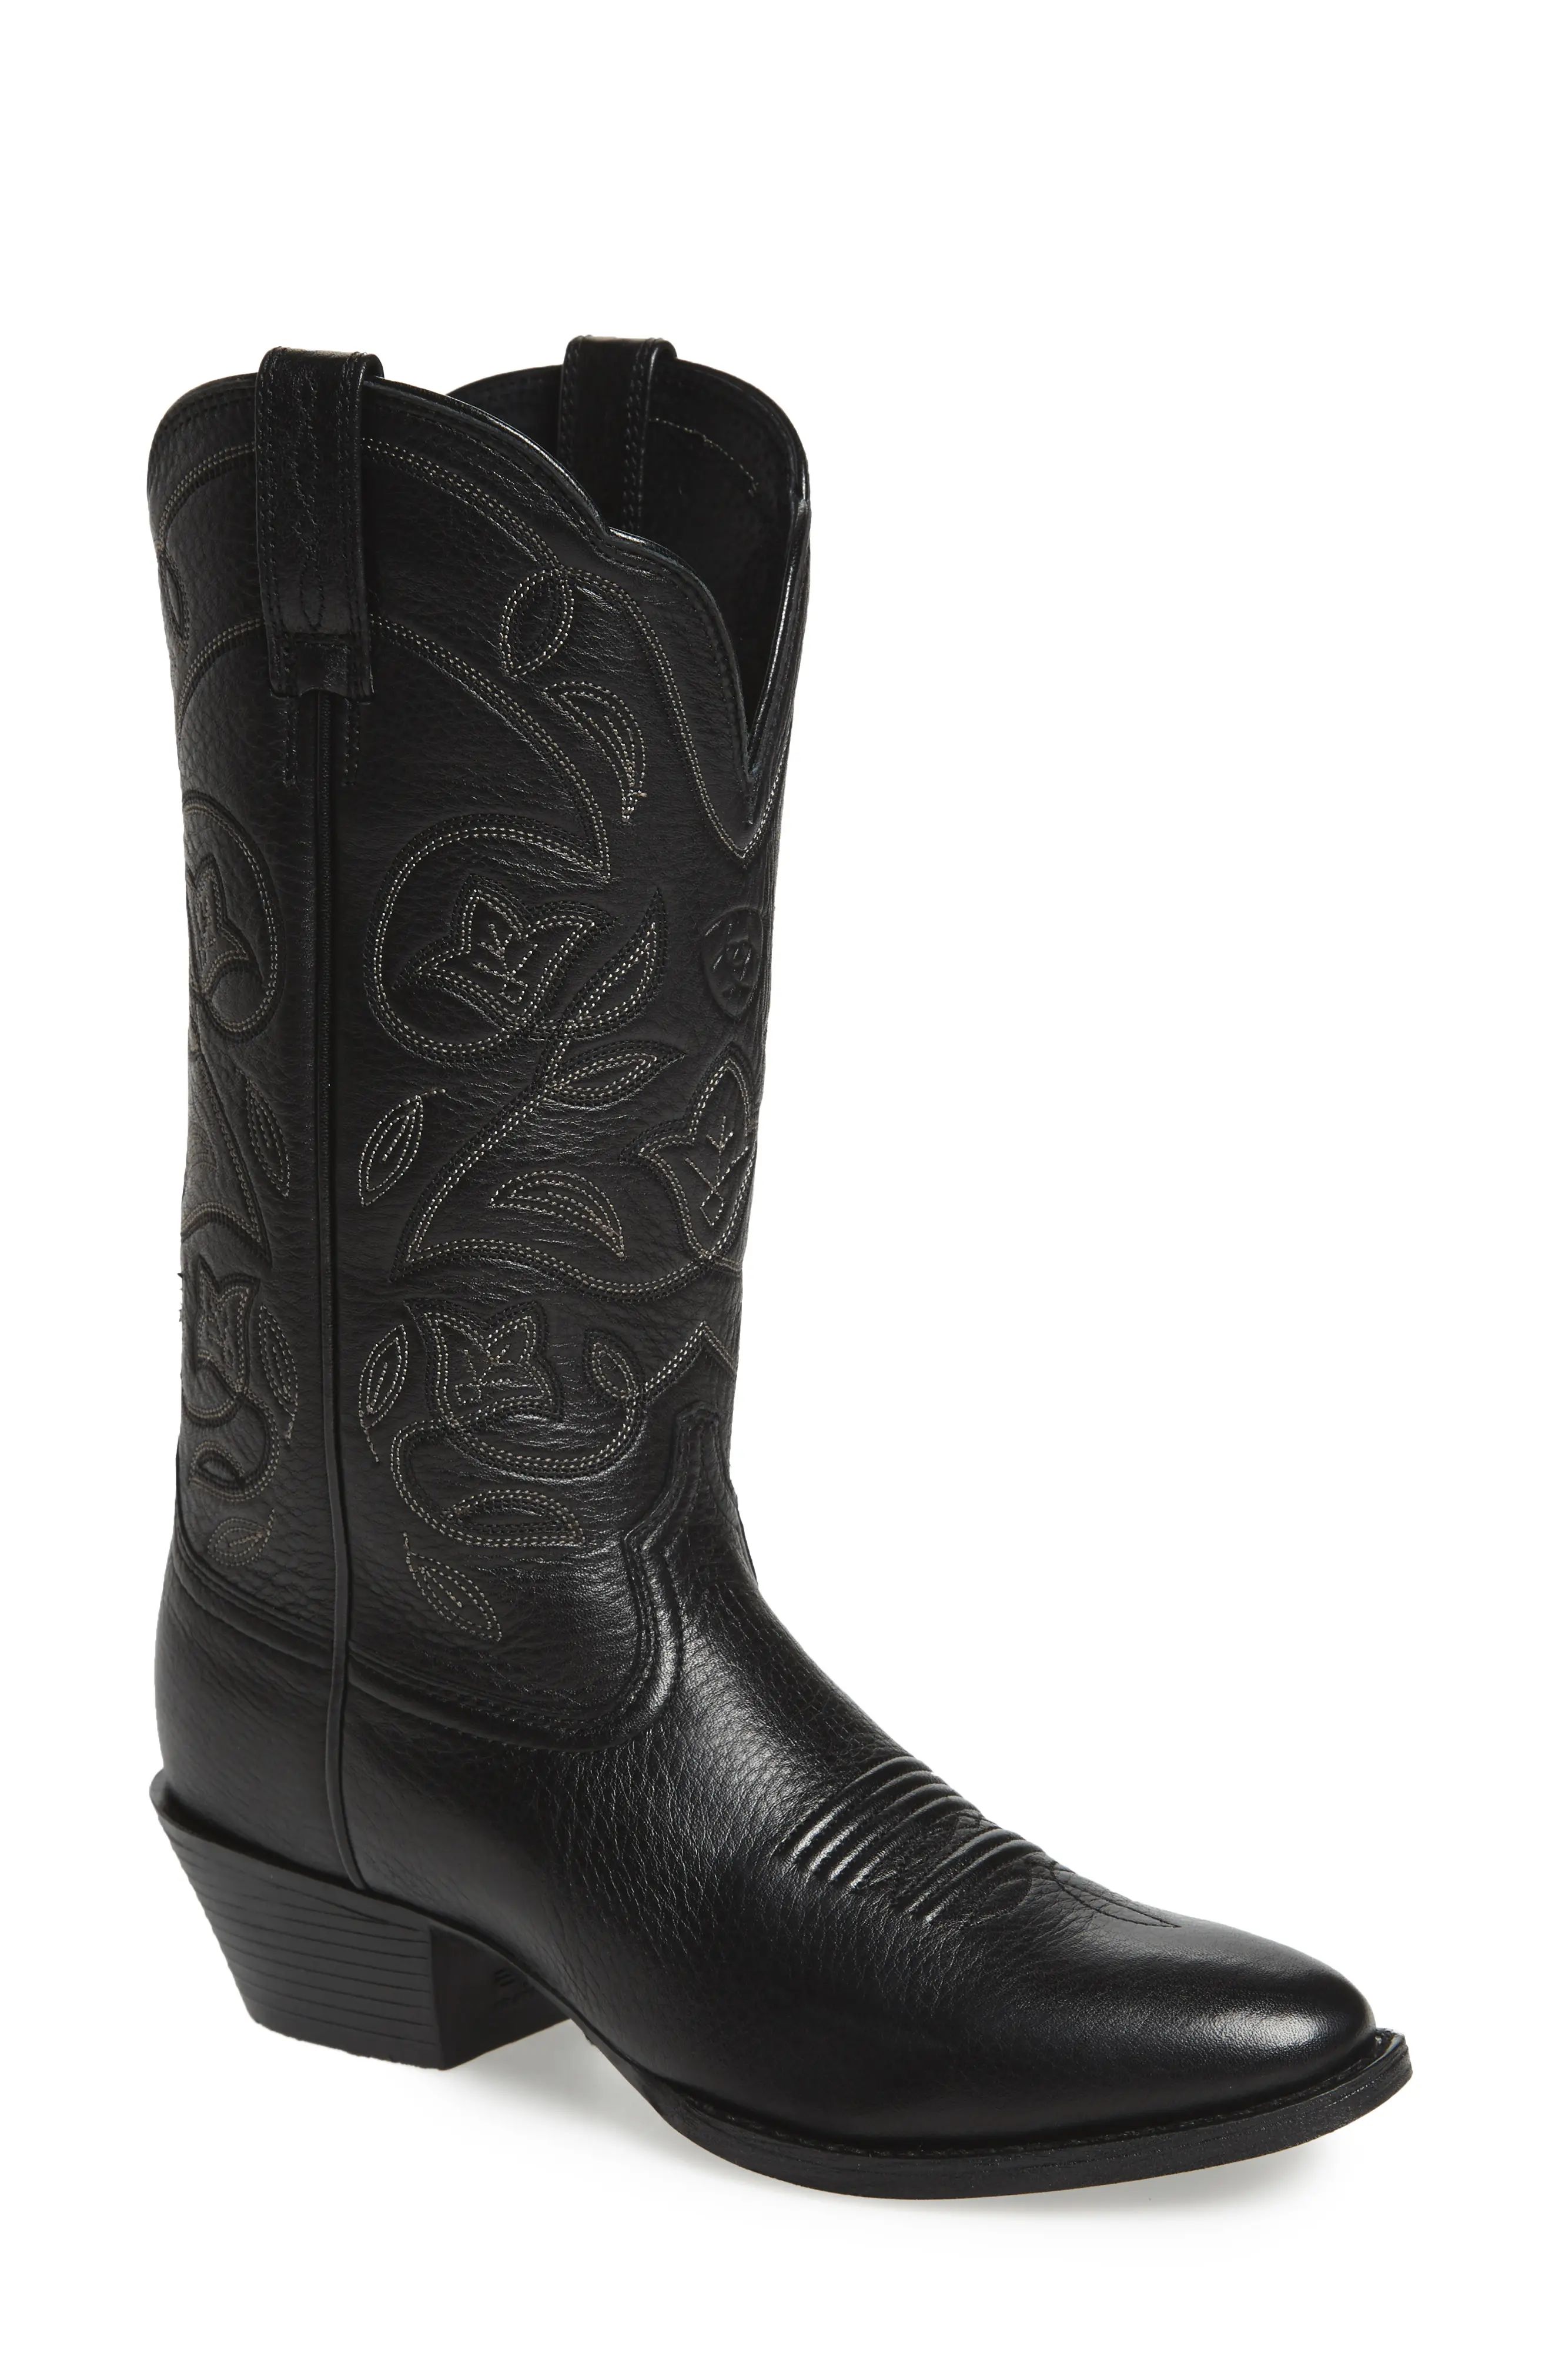 Women's Ariat Heritage Western R-Toe Boot, Size 5.5 M - Black | Nordstrom